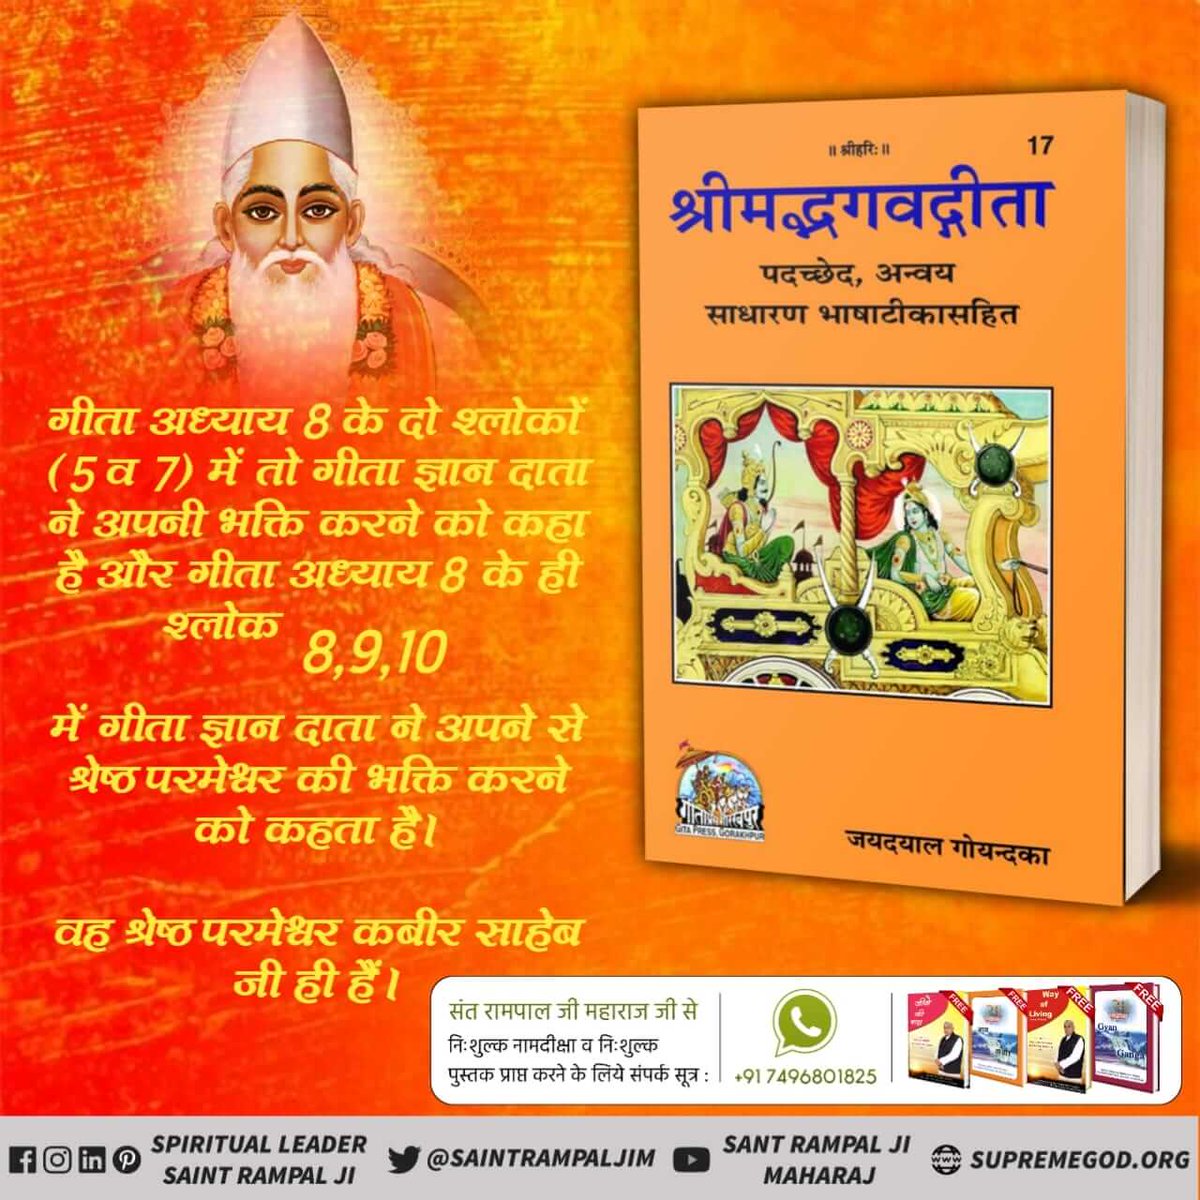 #भक्ति_से_भगवान_तक A human being in the present life should take initiation from a Complete Saint and worship the true God Kabir. Otherwise he/she will have to suffer in the lives of animals. Take initiation from Complete @SaintRampalJiM and save your soul.🙏